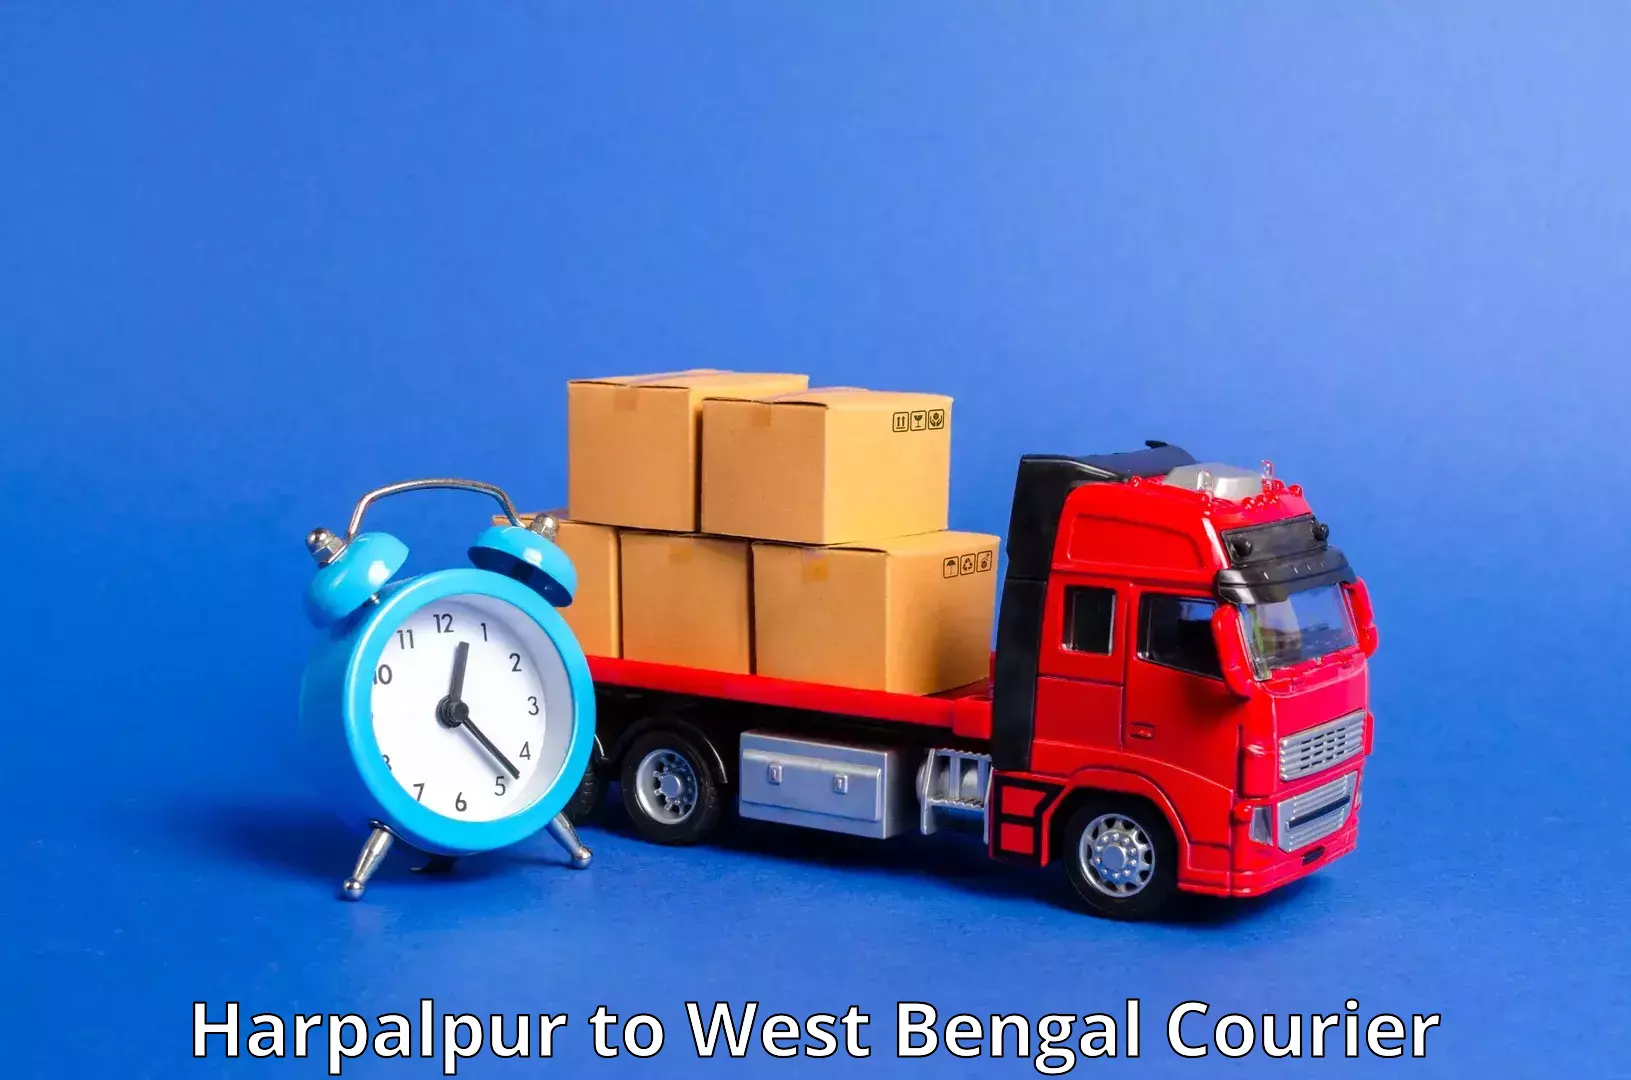 Package delivery network Harpalpur to Purba Medinipur